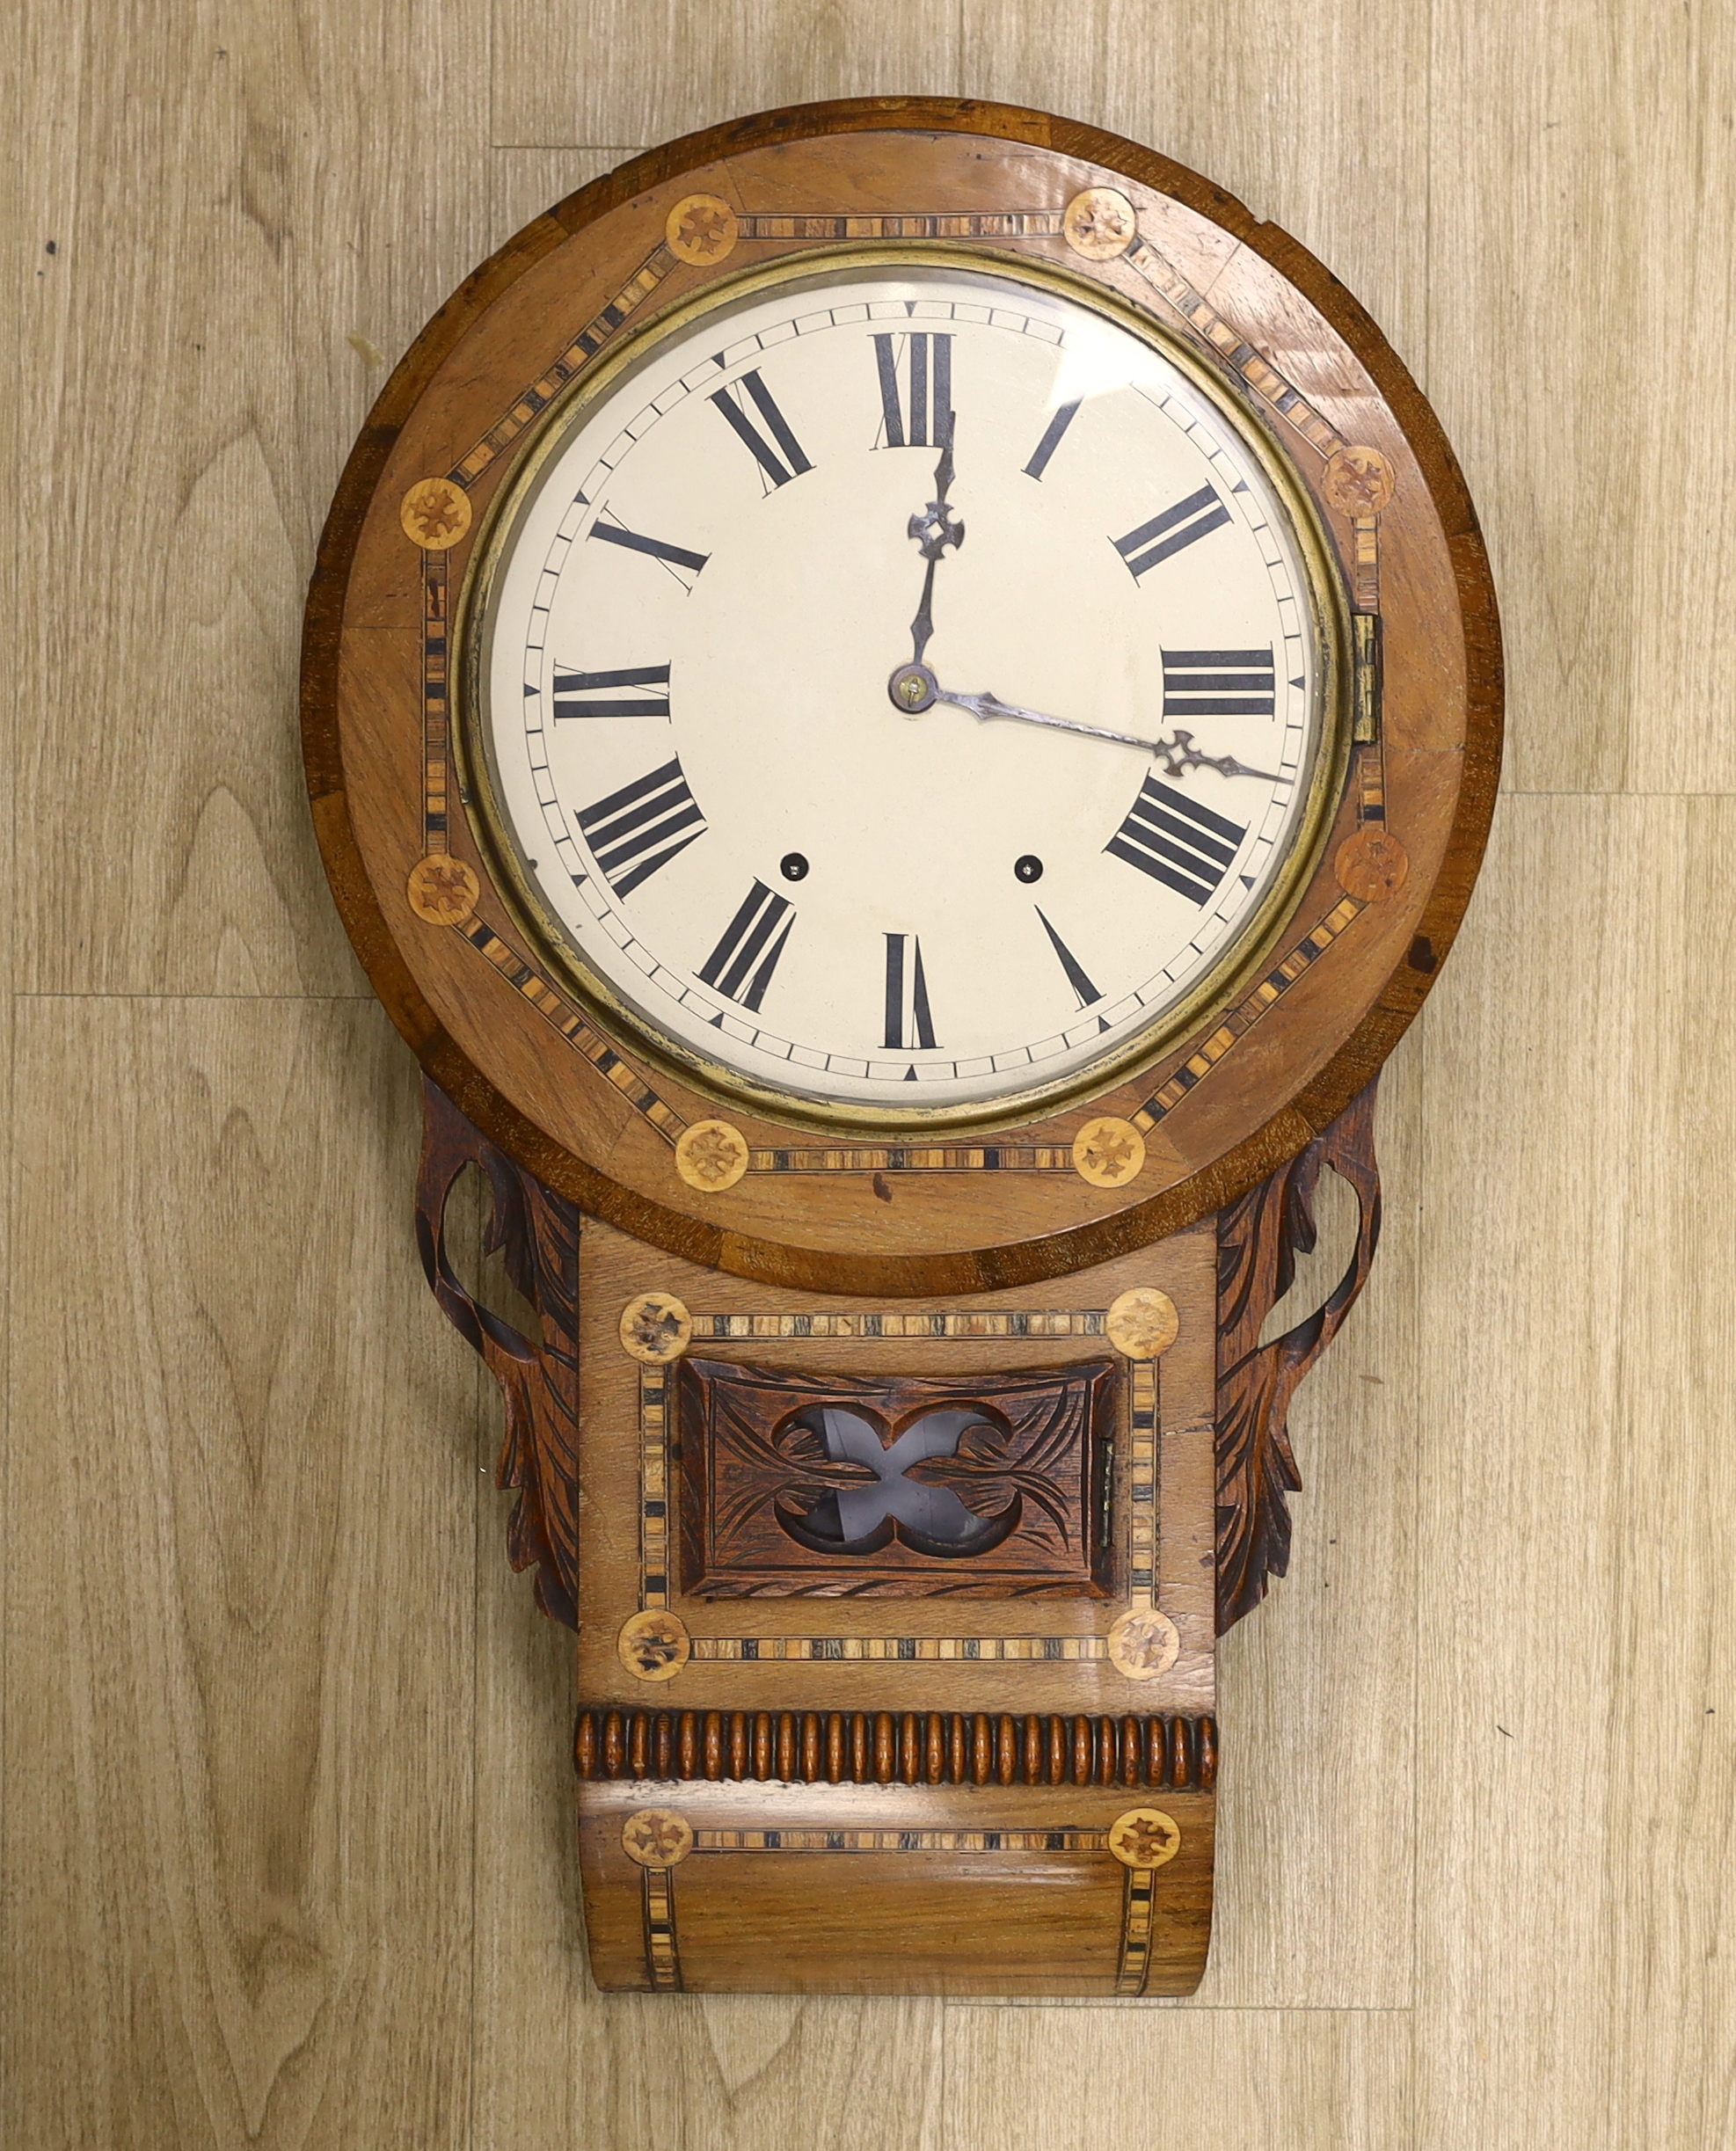 A late 19th century inlaid drop dial wall clock, 70cm